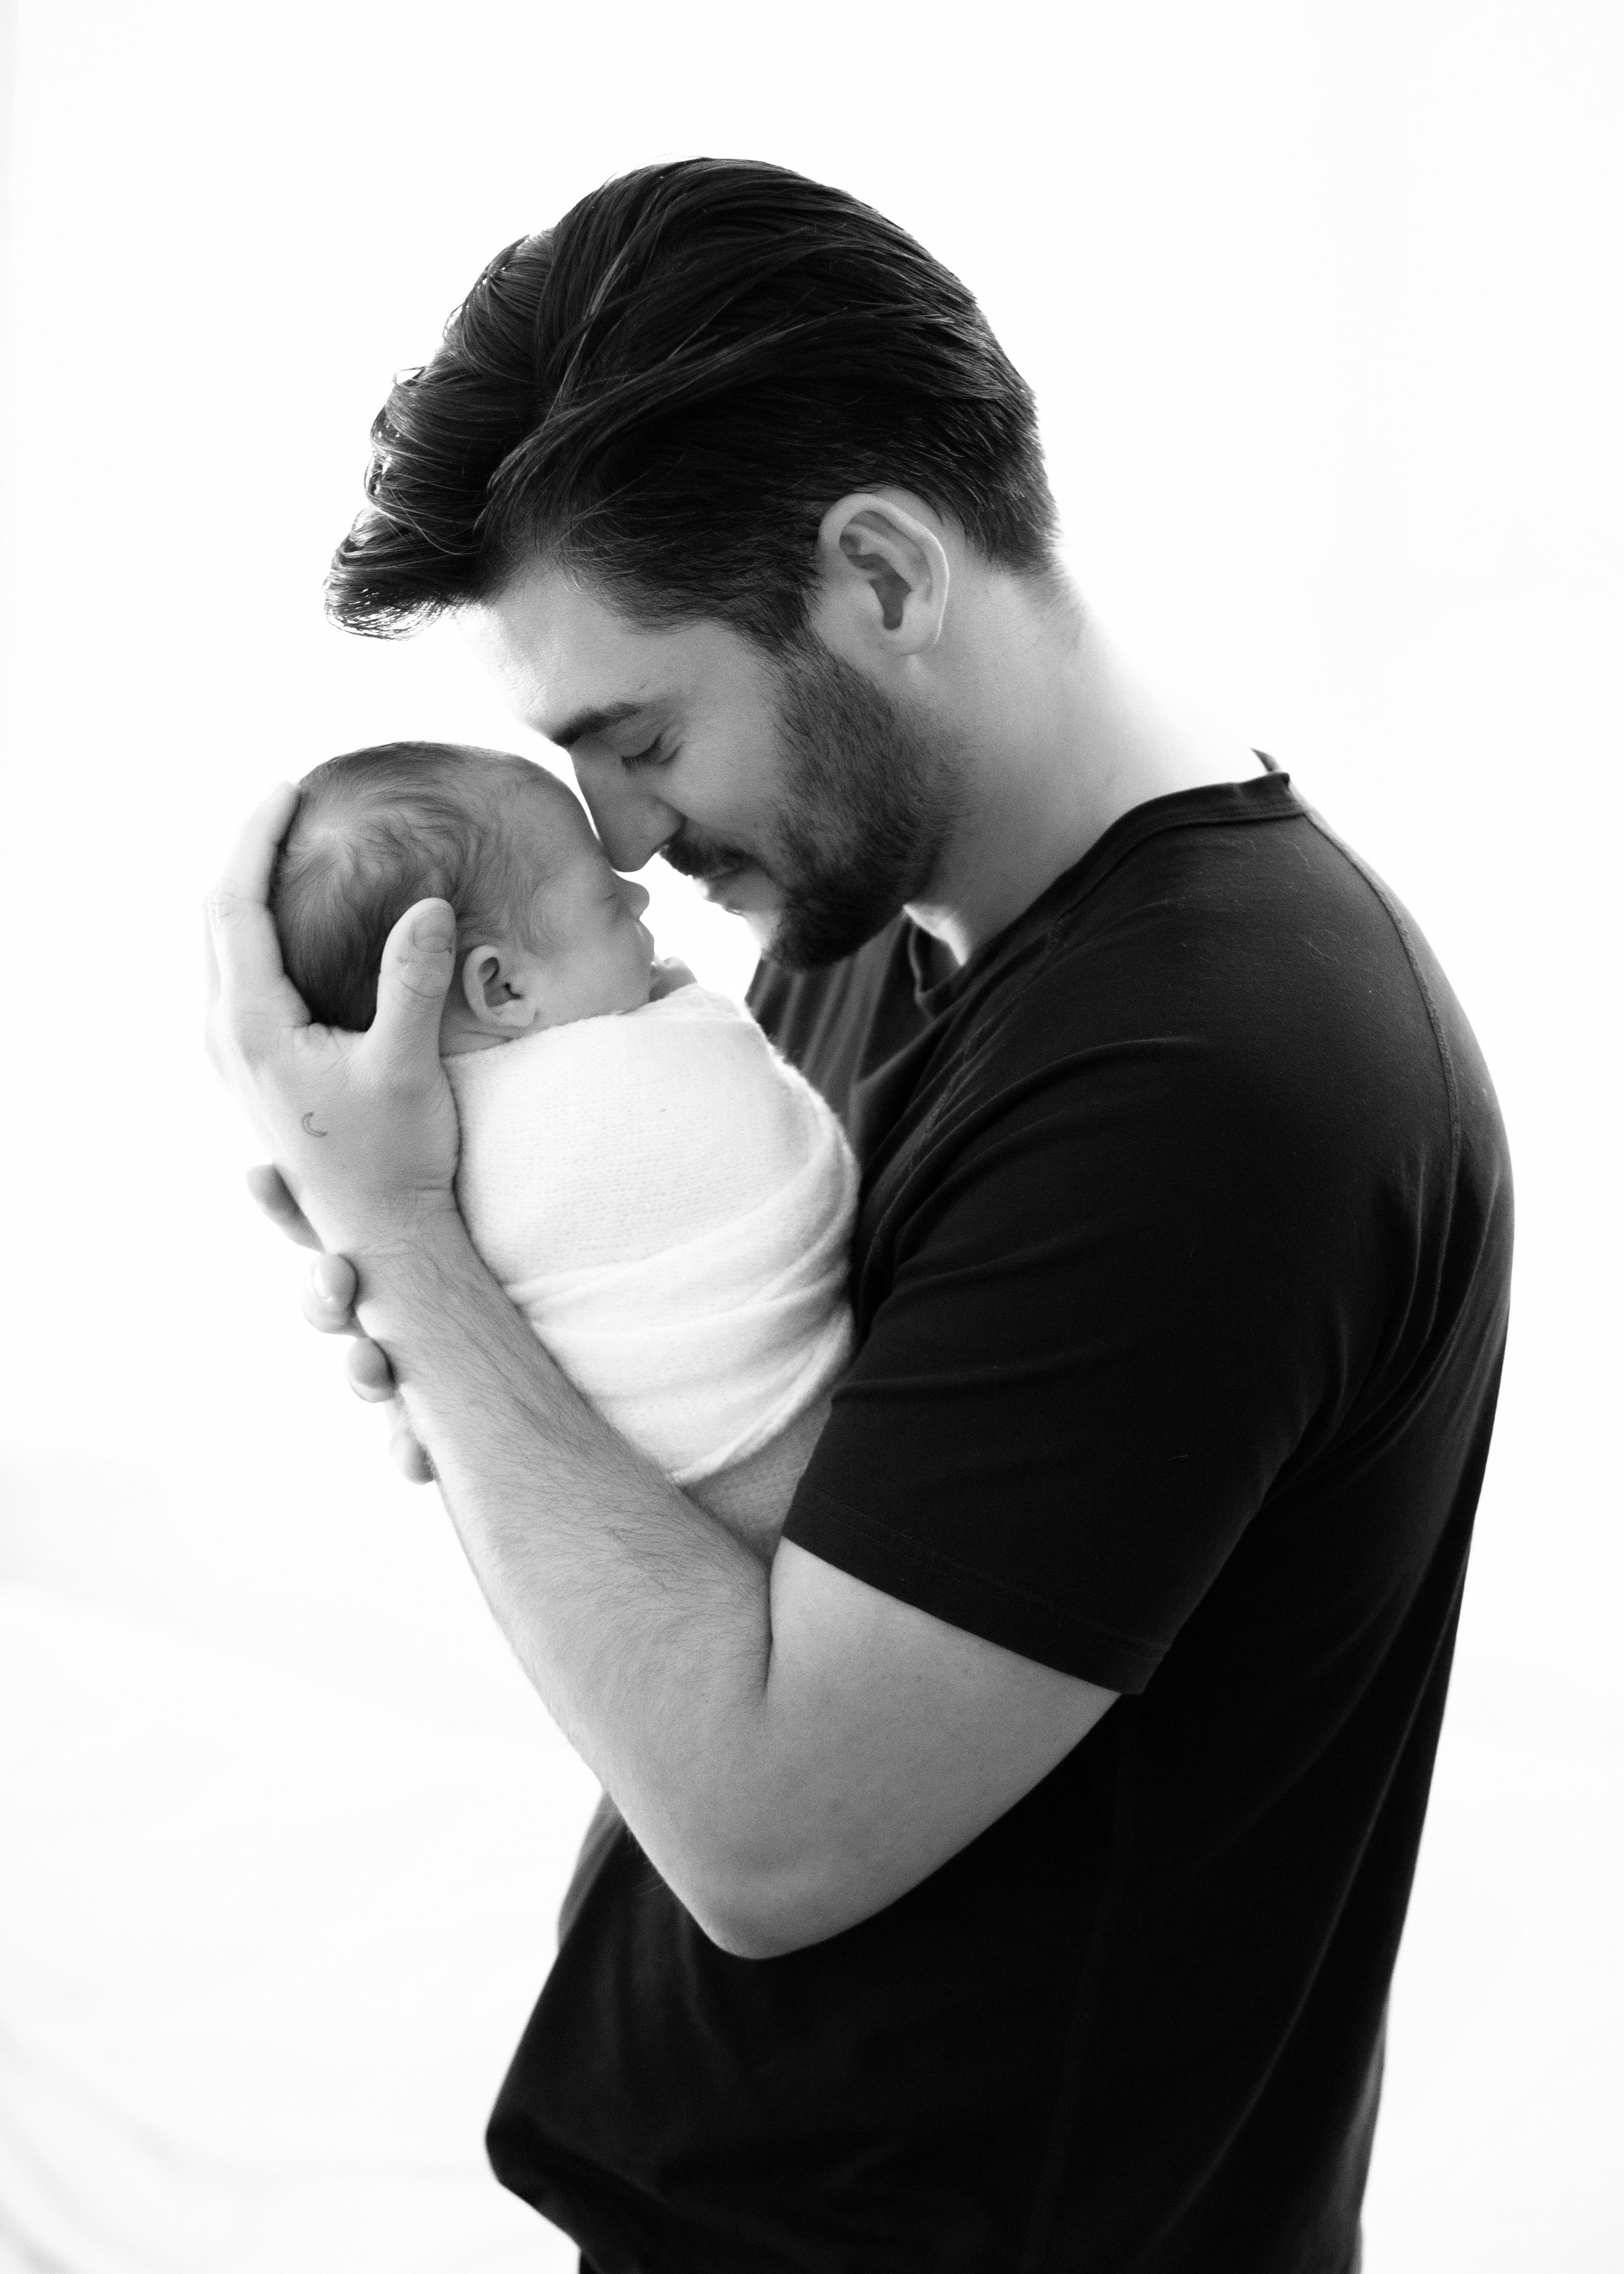 Dad and Baby Photo Ideas